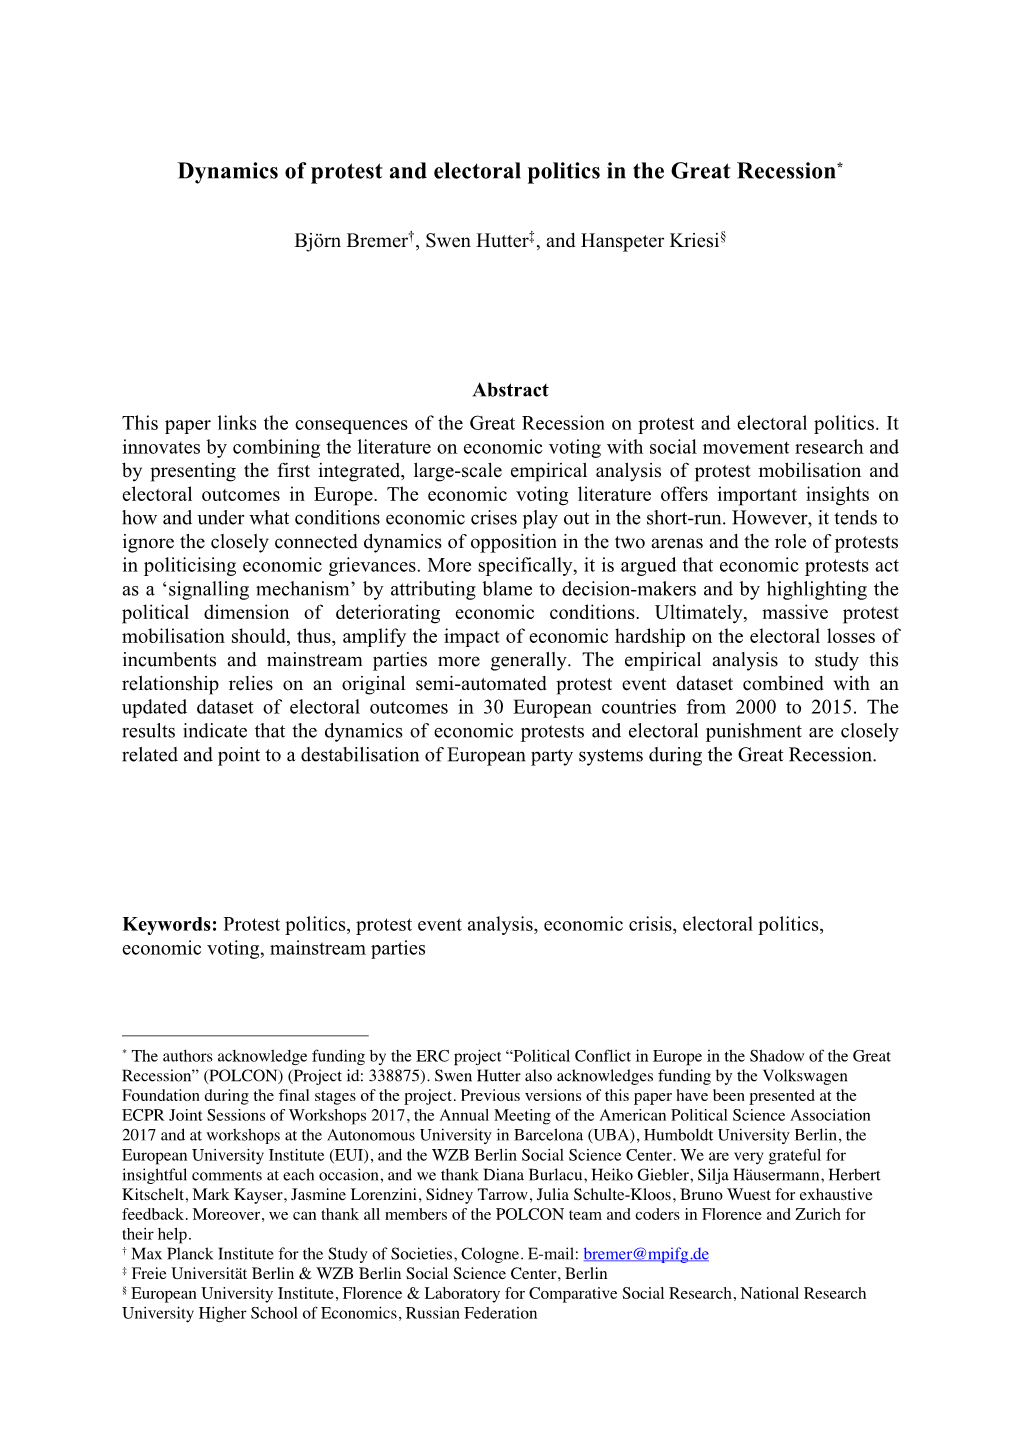 Dynamics of Protest and Electoral Politics in the Great Recession*